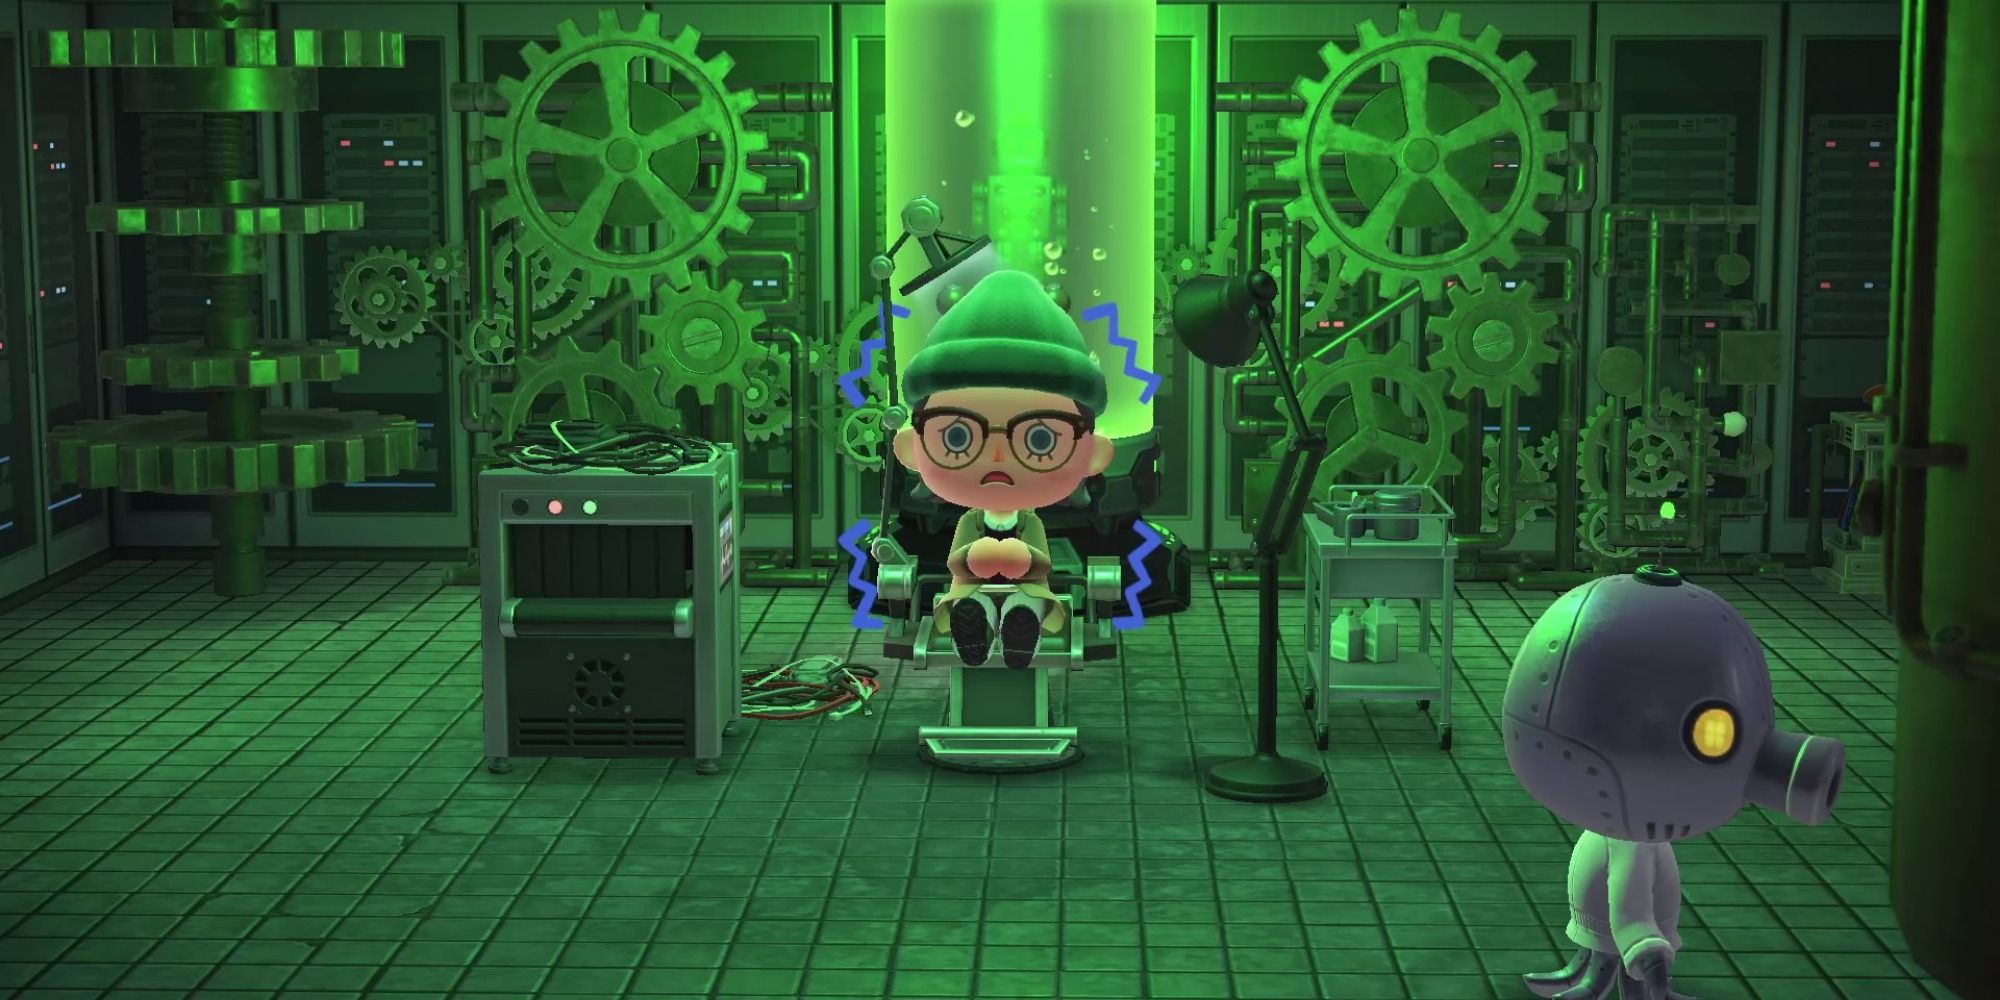 A player sits in a green lit science lab cowering in fear, while a robot octopus paces the room